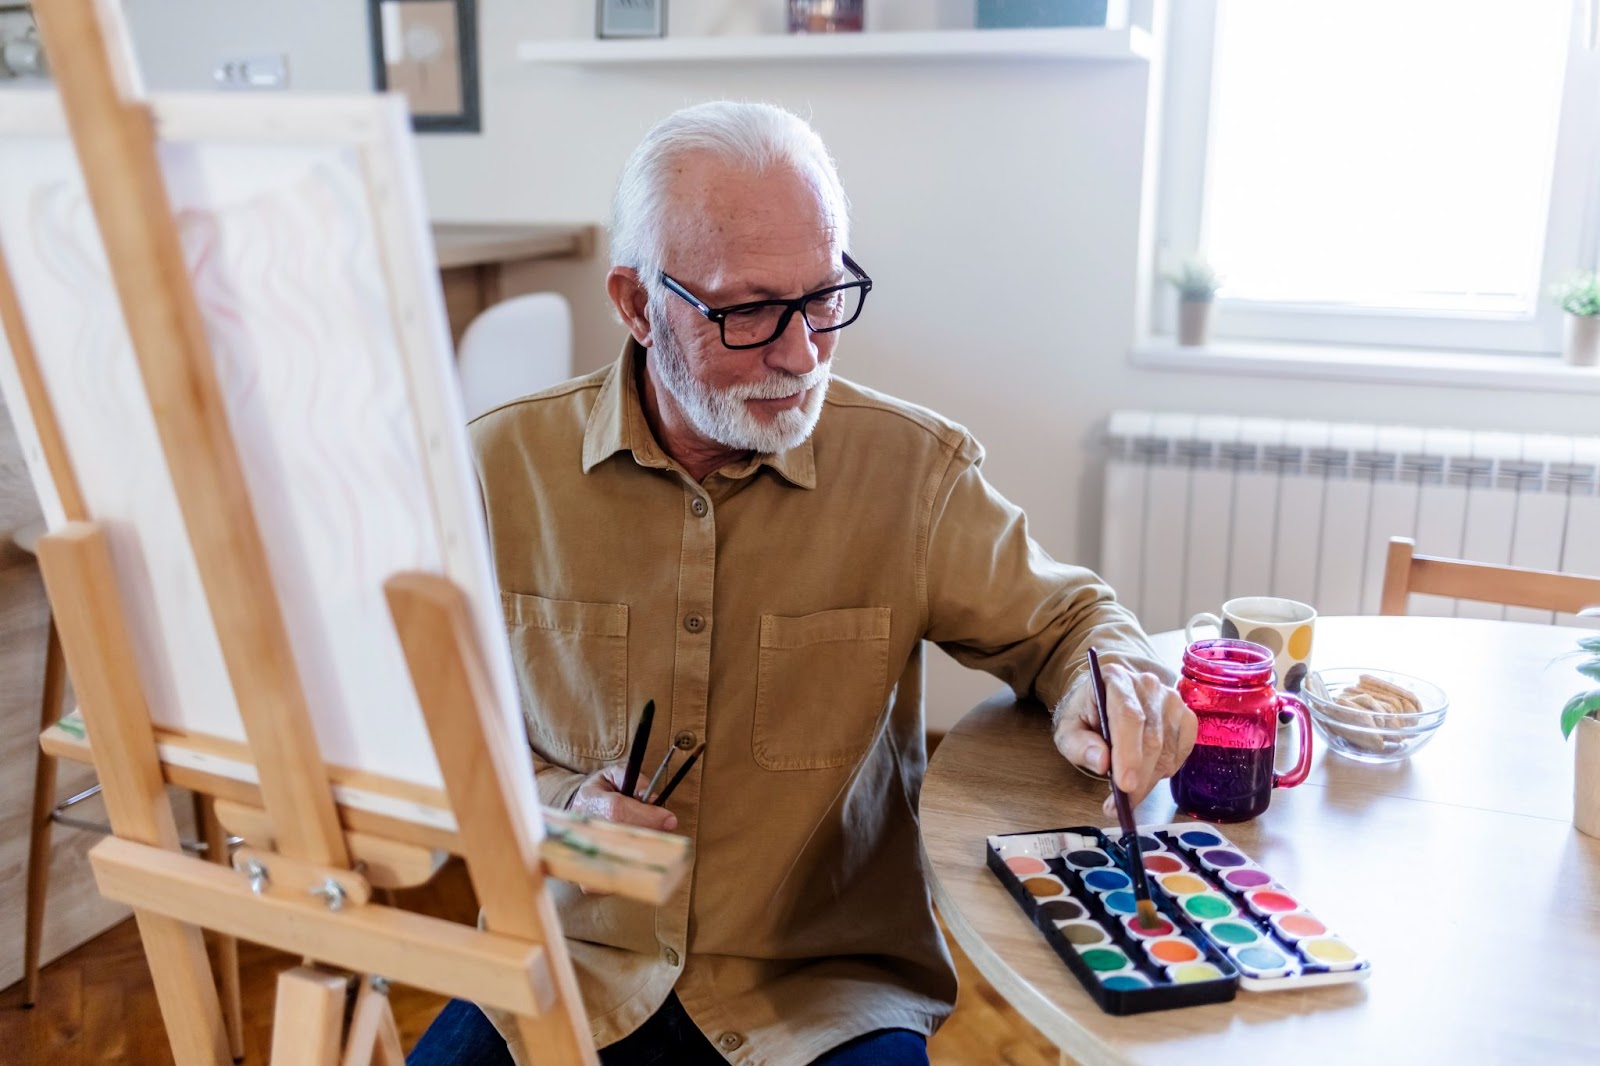 An elderly person engaged in the therapeutic activity of painting, expressing creativity and finding joy in their artistic pursuit.